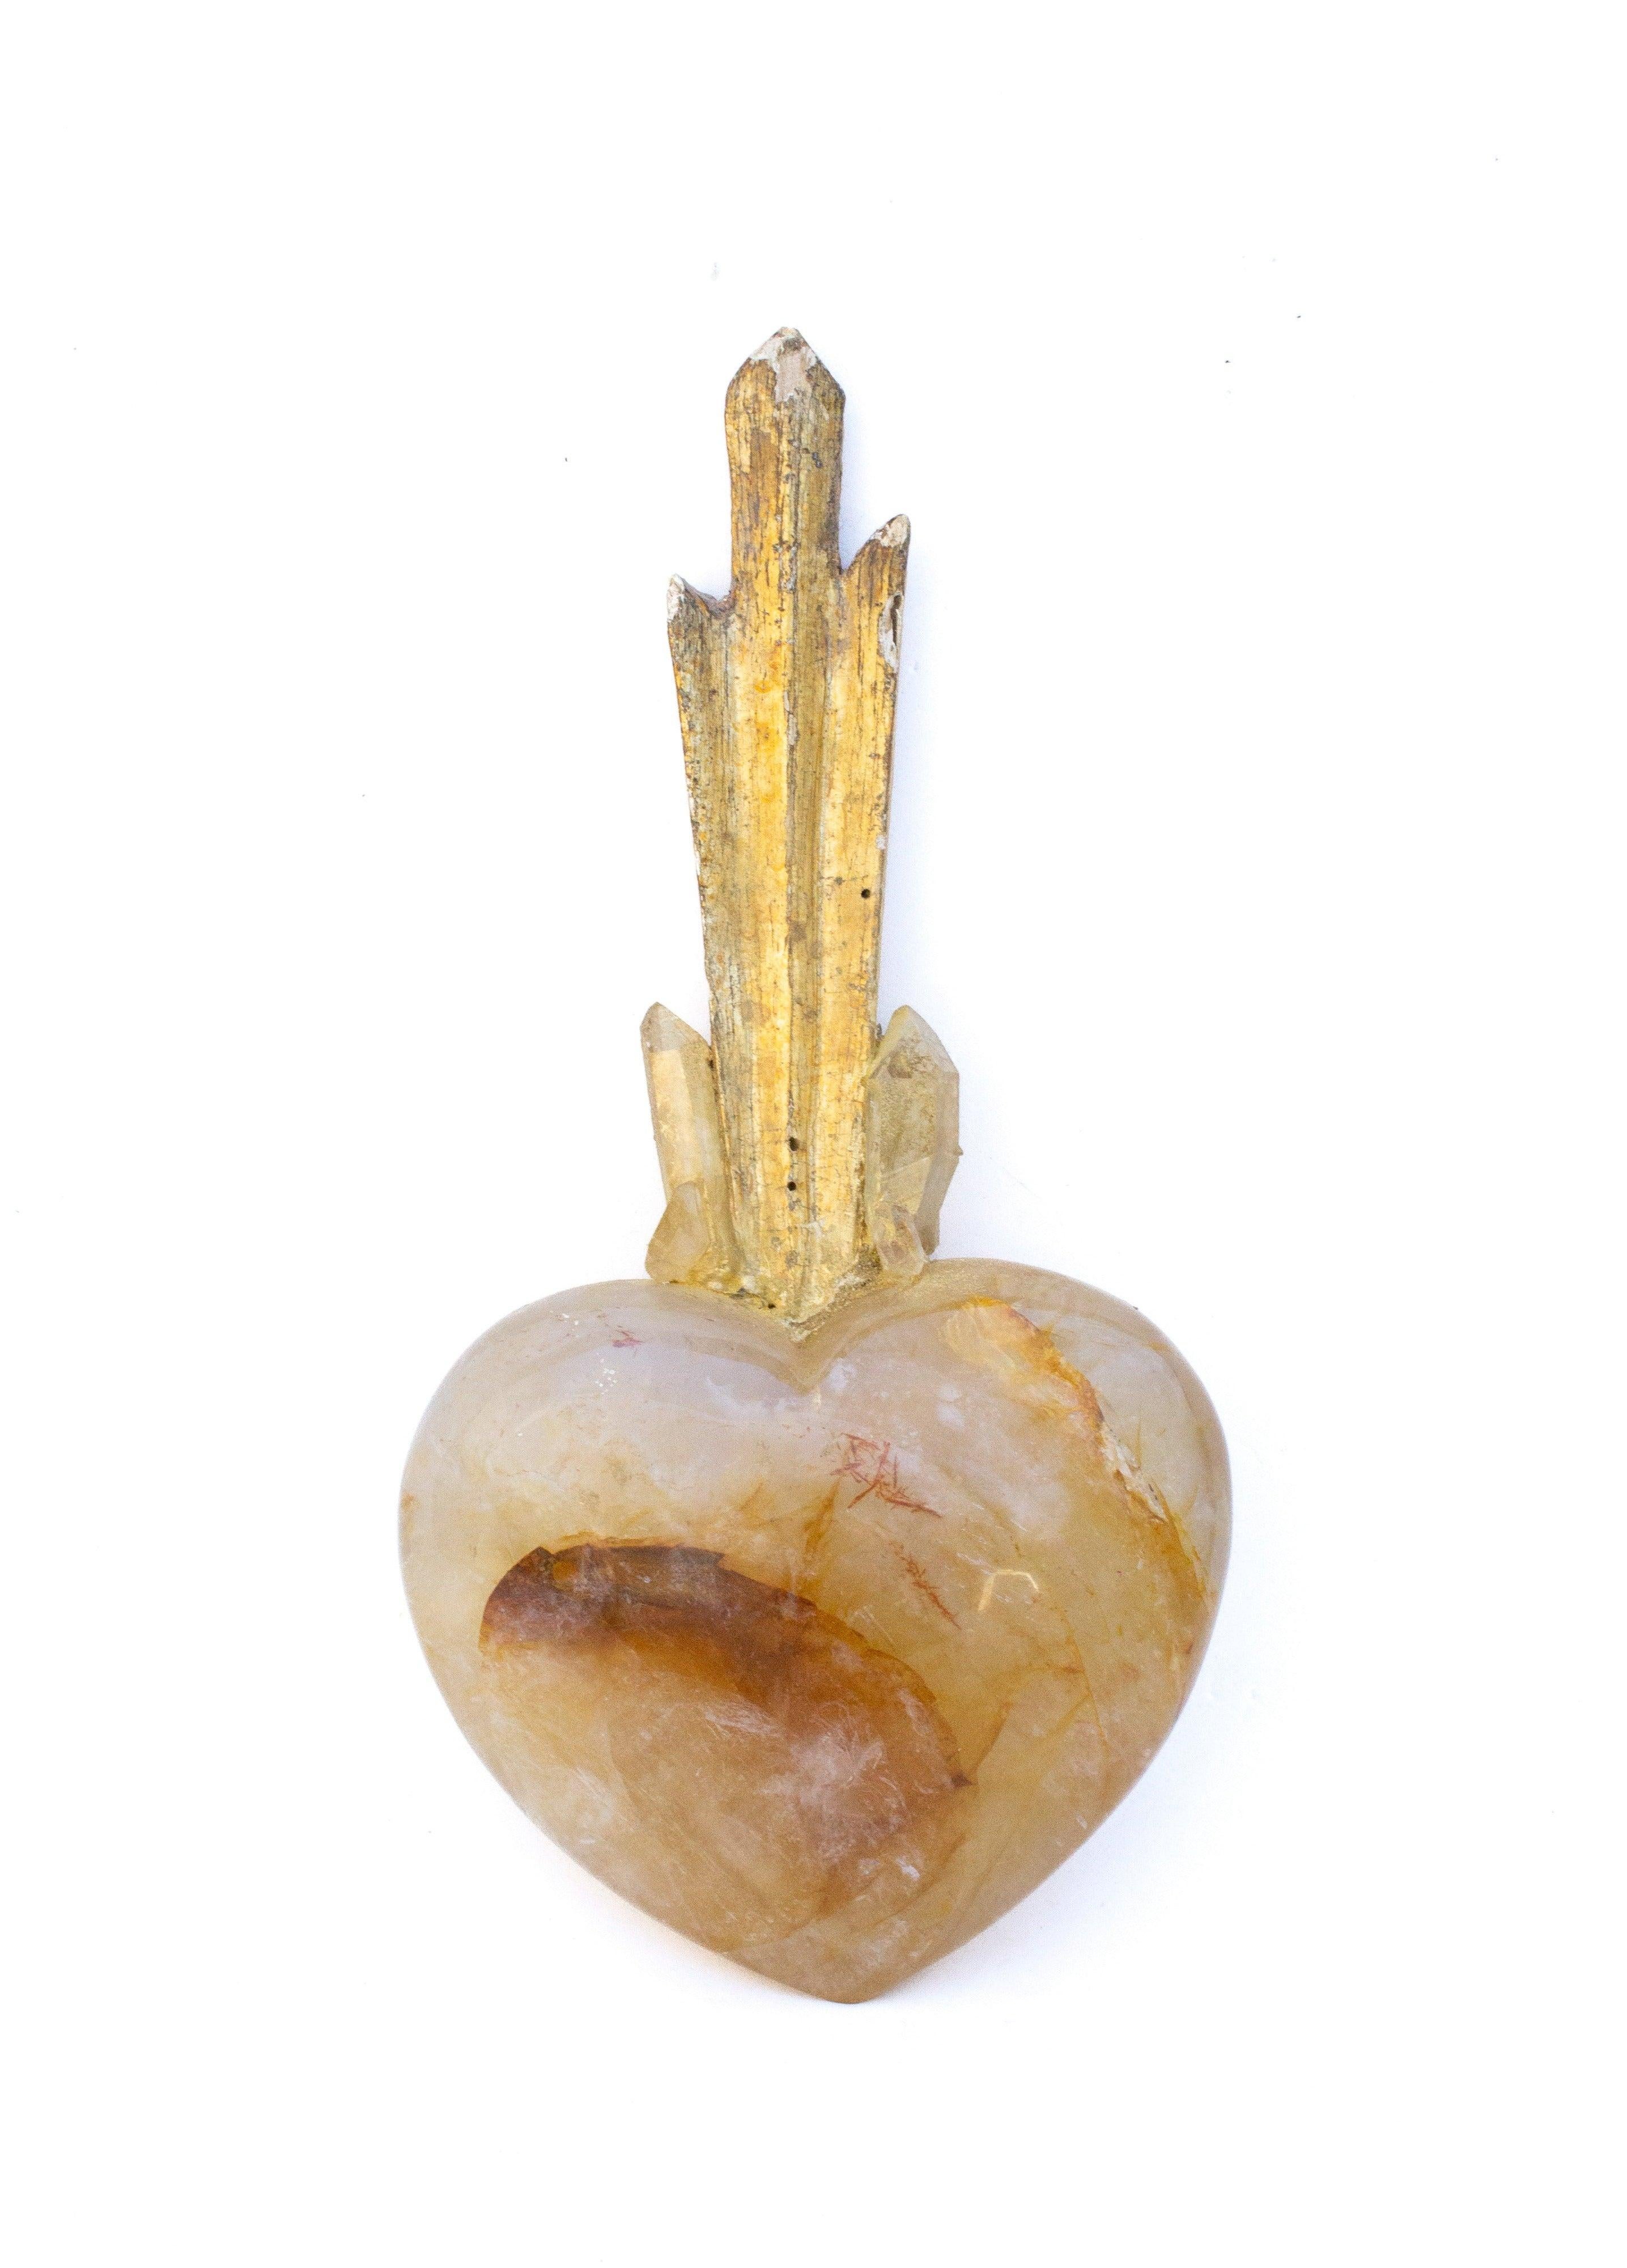 Sculptural Sacred Heart - 18th century Italian sunray mounted on a yellow hematoid heart and adorned with yellow crystal quartz points. The piece is inspired by 